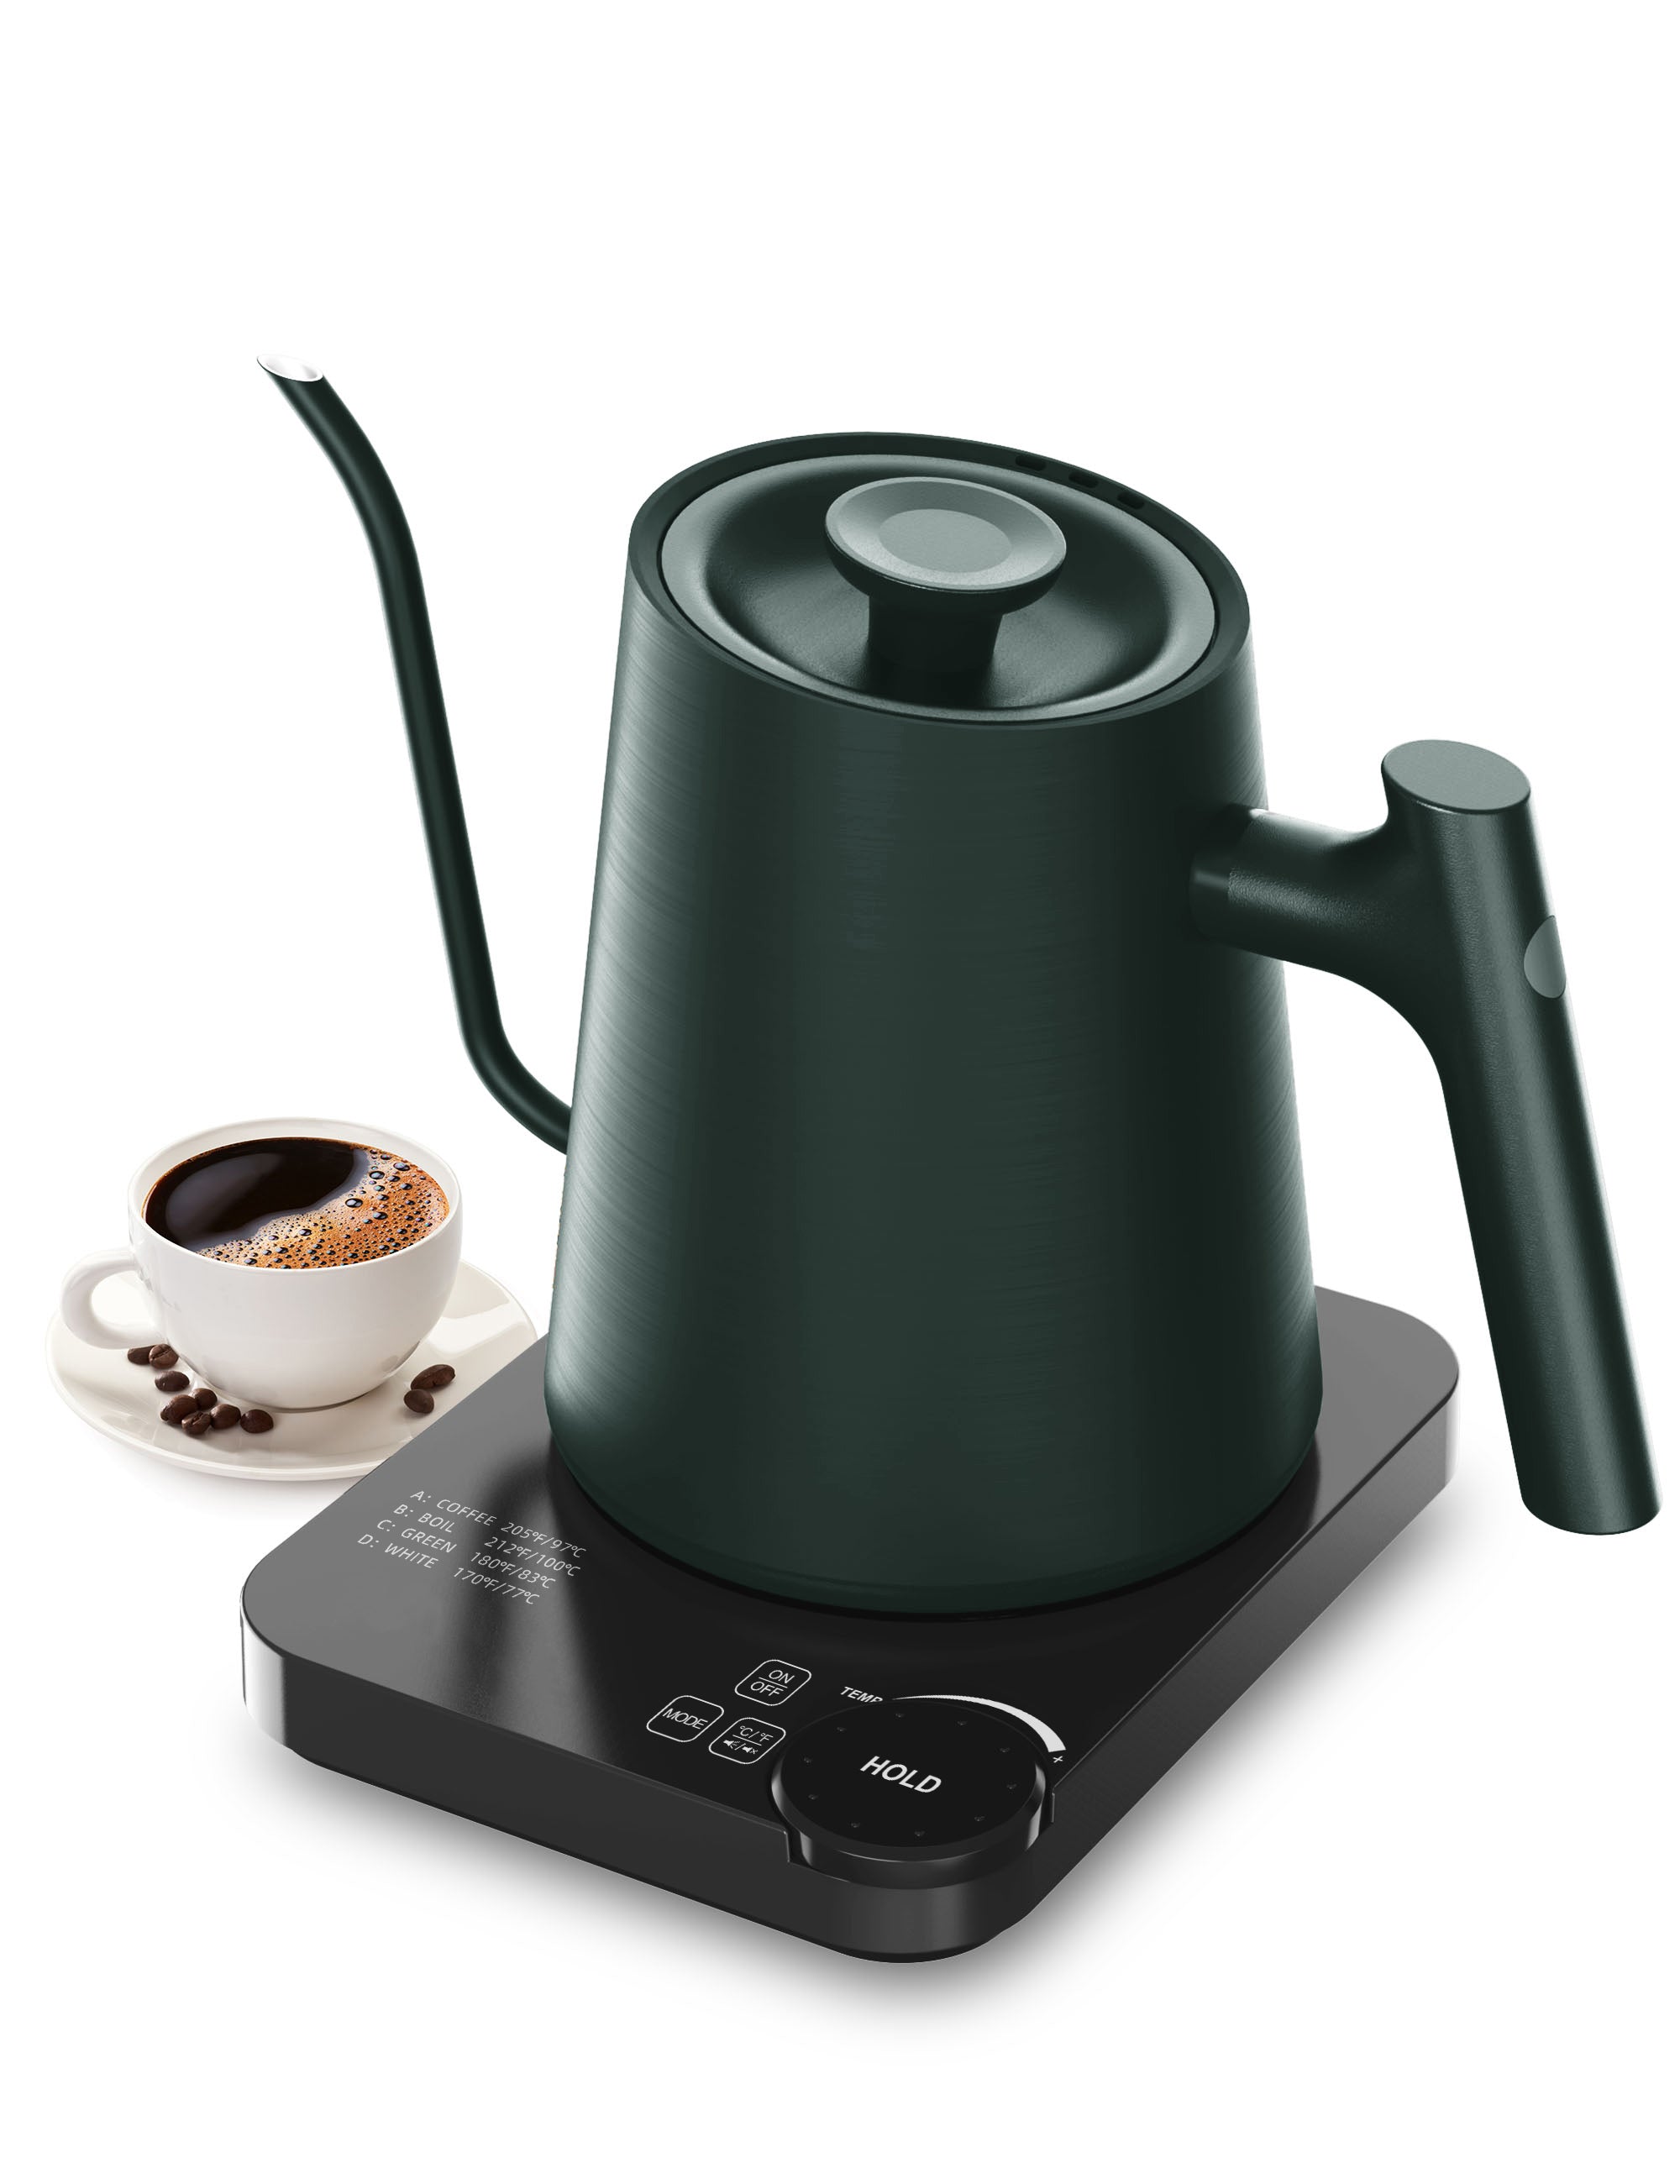 WHALL Gooseneck Electric Kettle - Tea/Coffee Kettle with LED